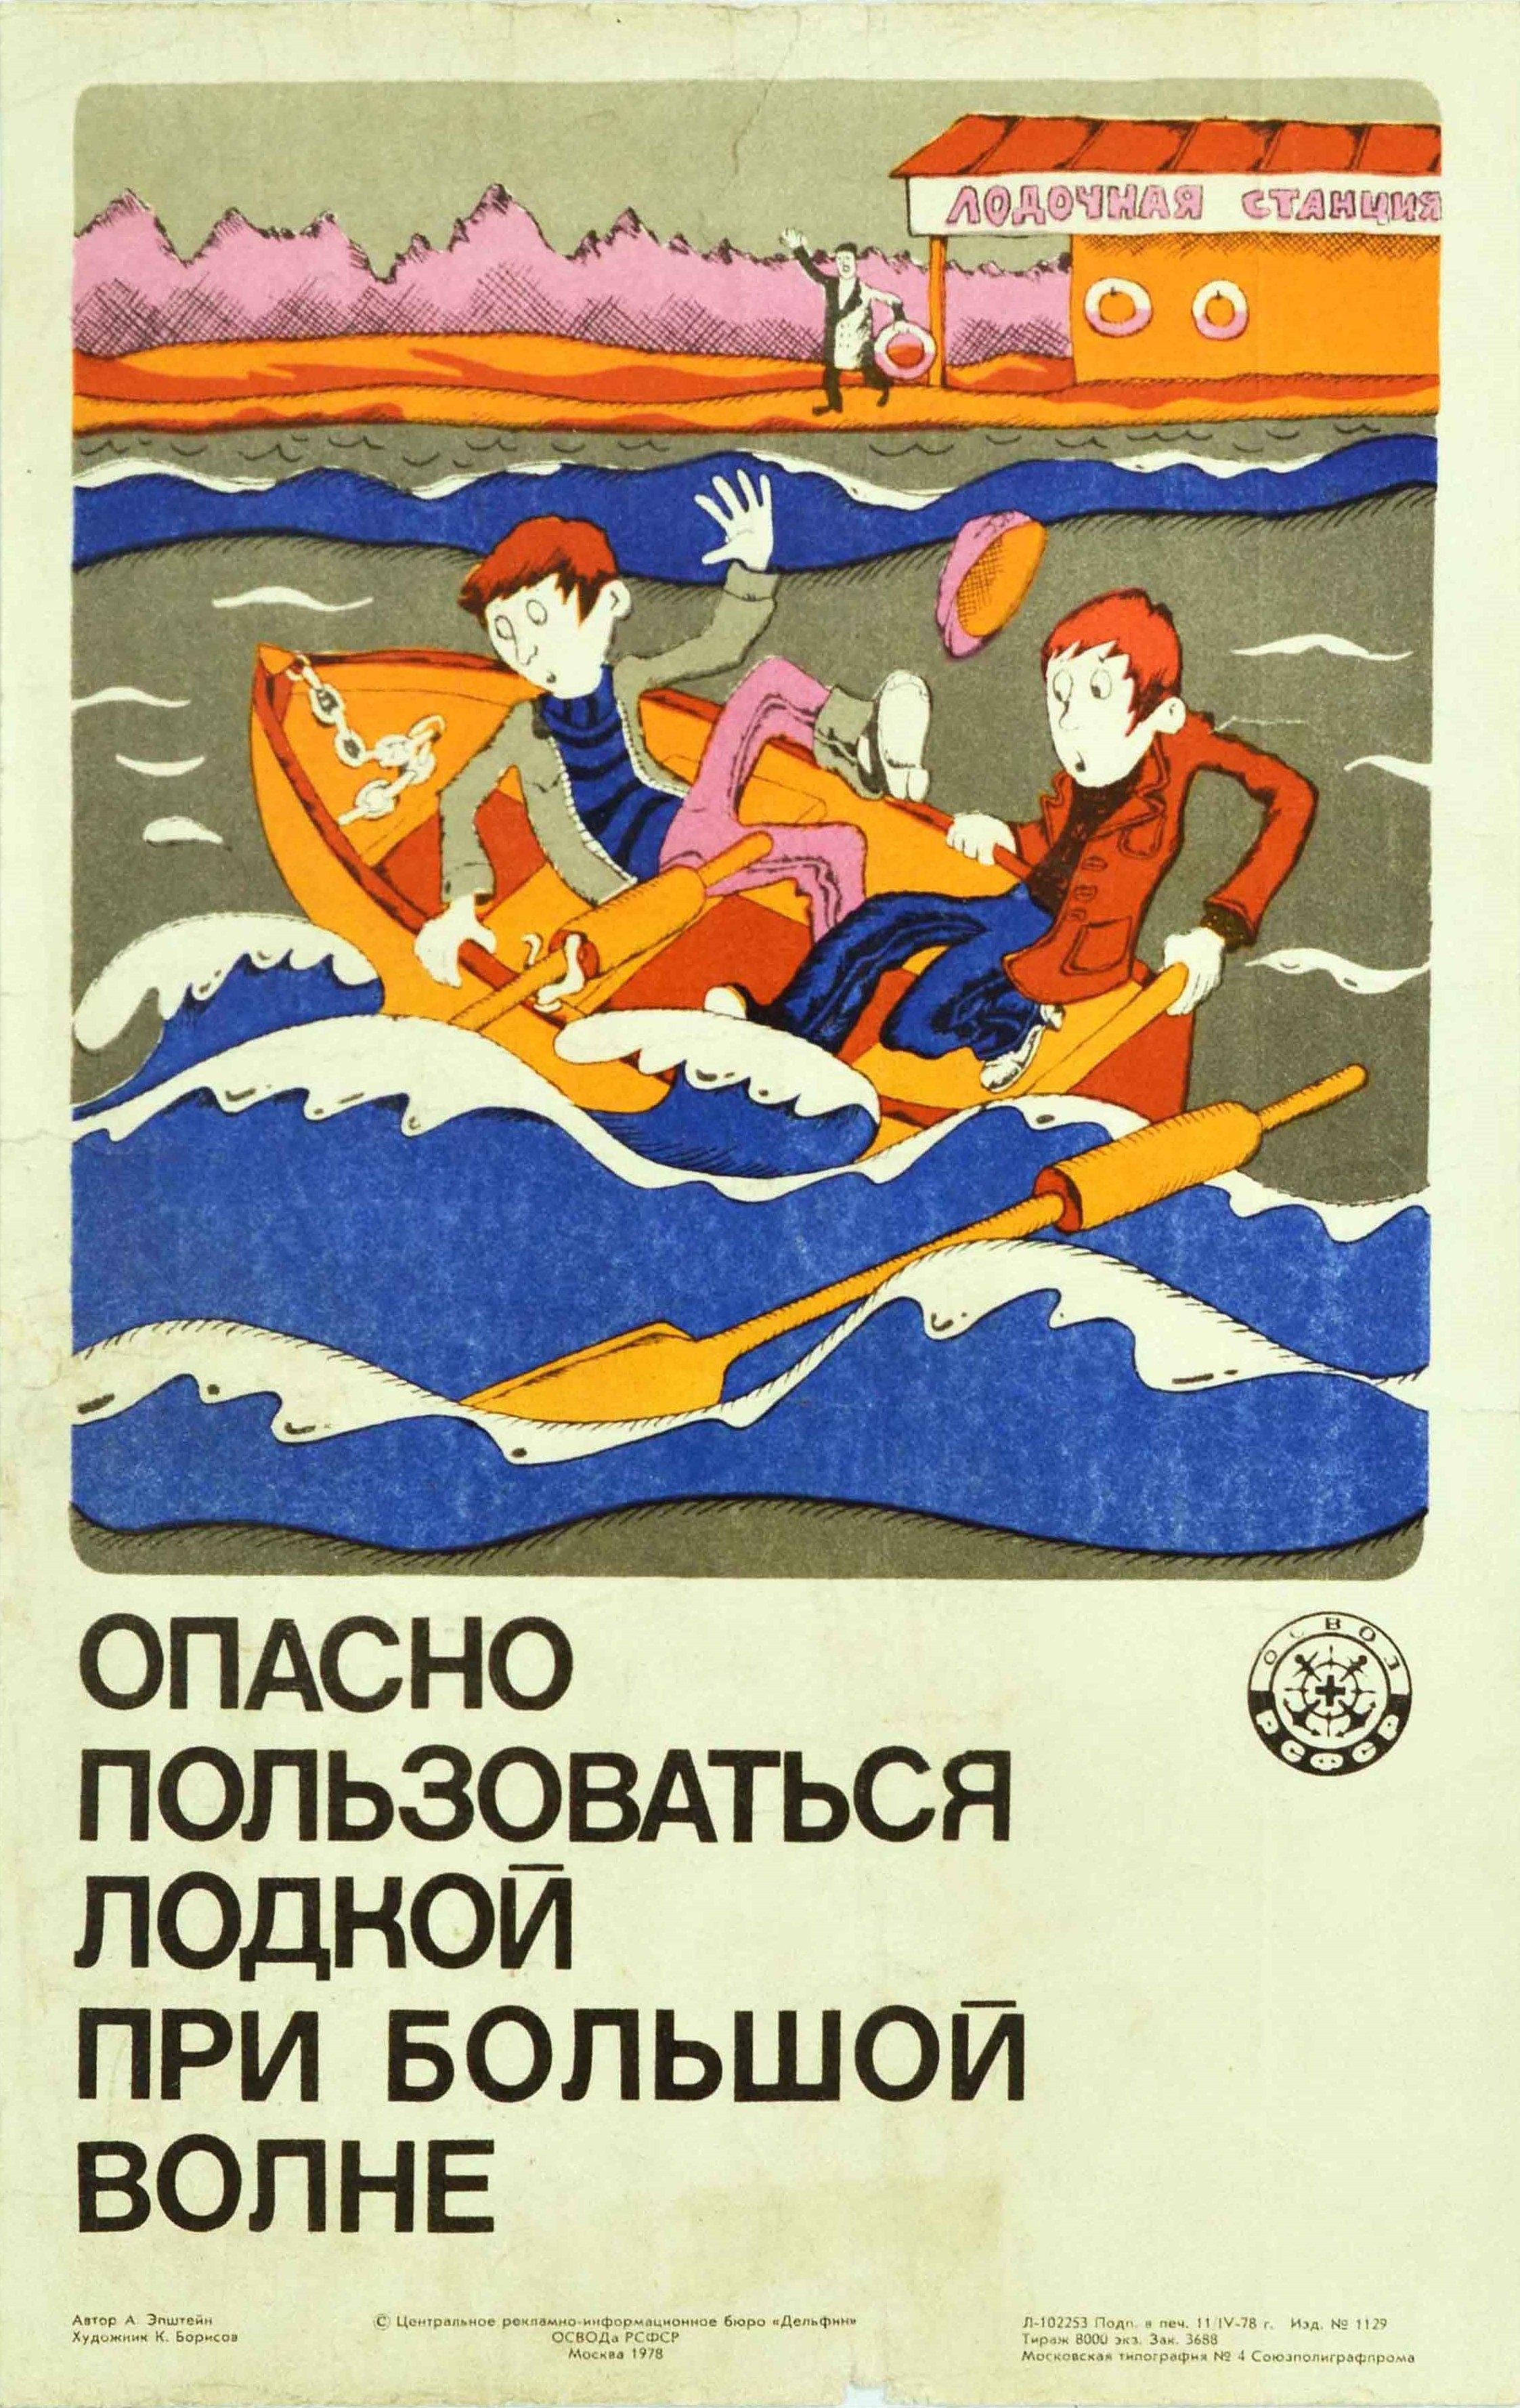 Original vintage Soviet propaganda poster issued by OSVOD calling for safety on the water and accident prevention at sea - ?????? ???????????? ?????? ??? ??????? ????? / It is dangerous to use a boat in high waves - featuring an illustration of two